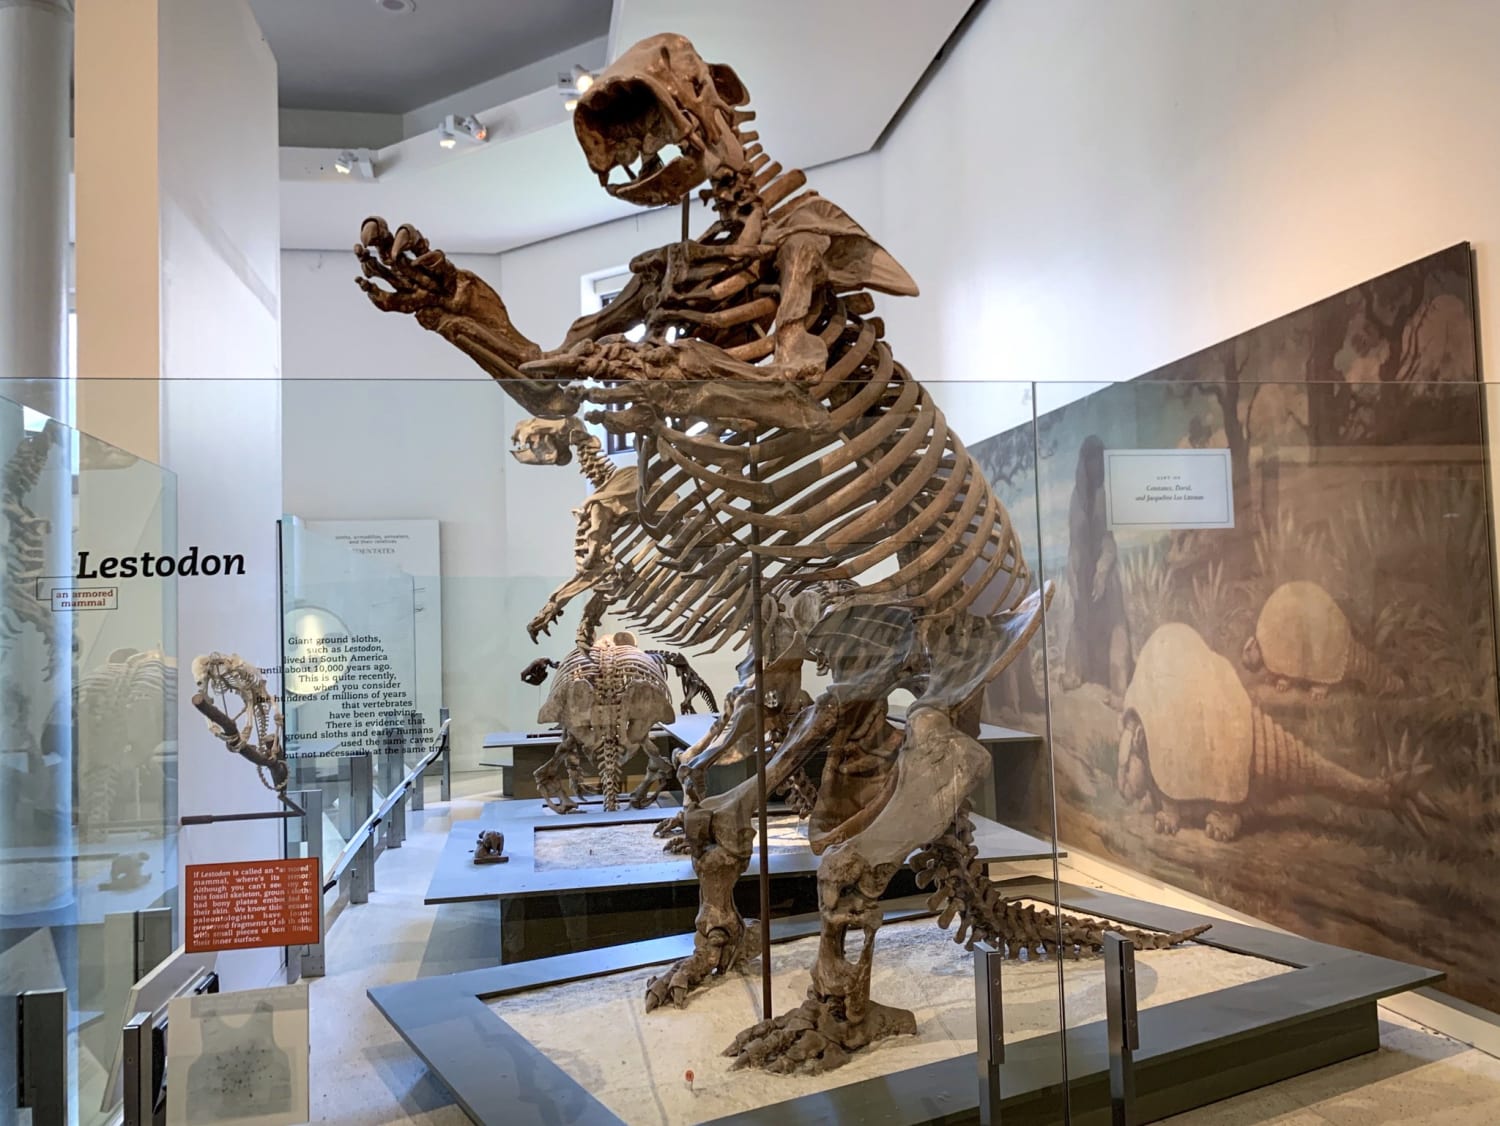 Exhibit of the Day: the giant ground sloth from the Hall of Primitive Mammals. DYK Avocado trees “co-evolved” w/ giant ground sloths & other megafauna in S. America? By eating avocados whole, then pooping them out, they dispersed (& fertilized) avocado pits!